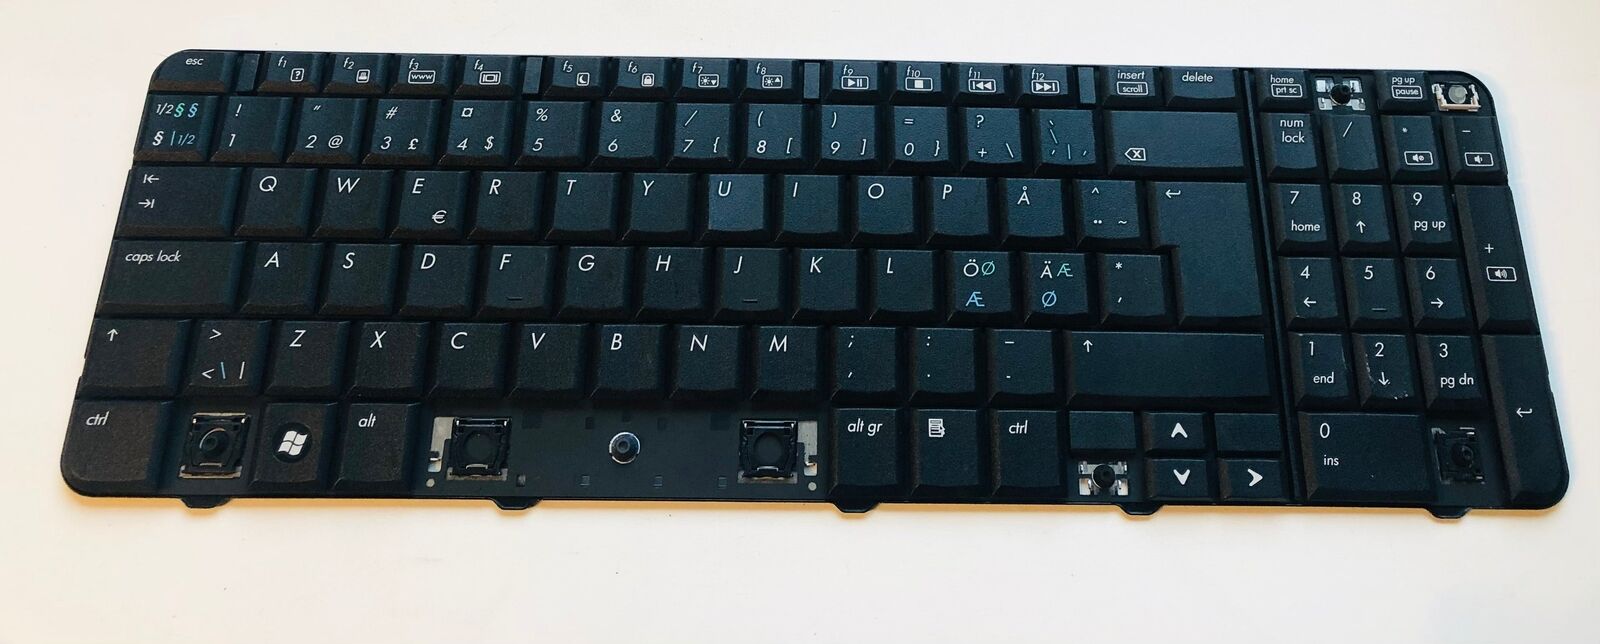 496771-091 keyboard - HP CQ60 SERIES - for parts